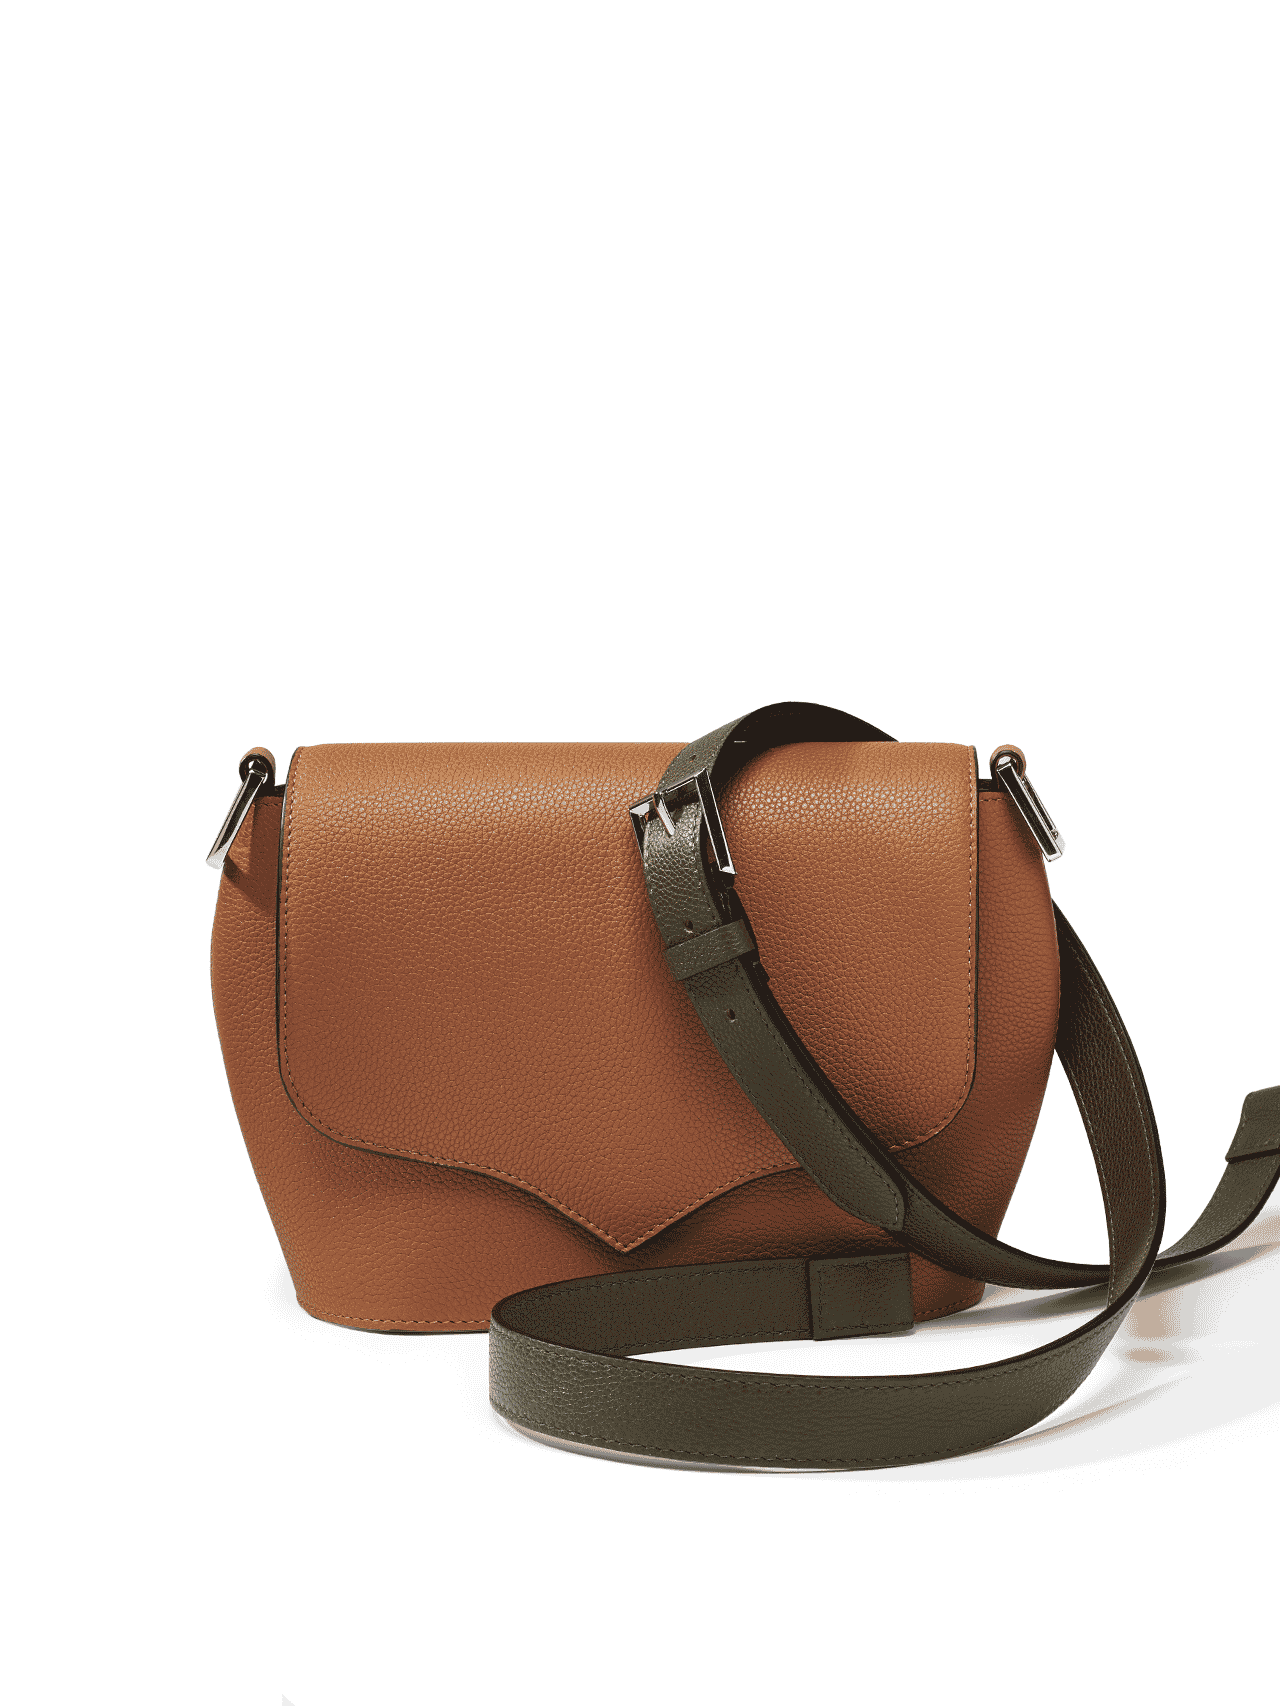 bag leather jean rousseau brown green